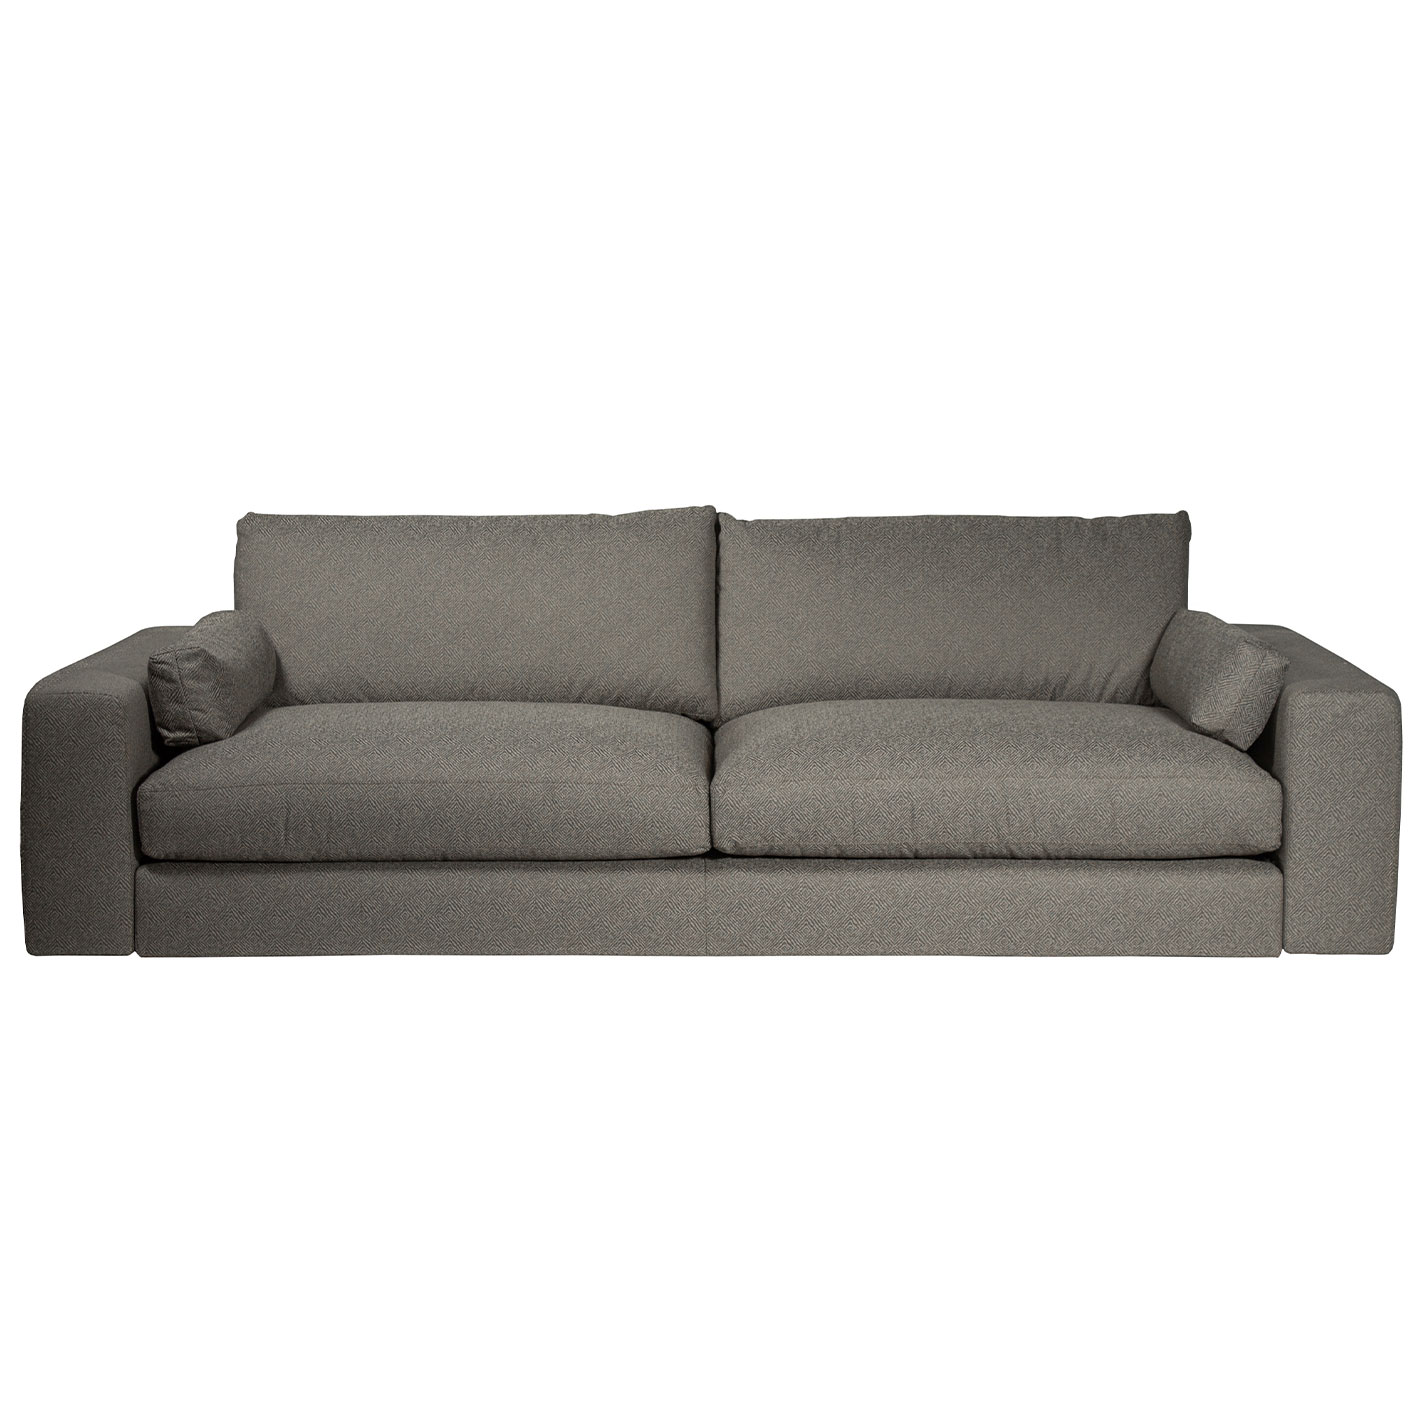 Outlet Sofas & Sessel - SUMMER MILANO OUTLET Einzelsofa